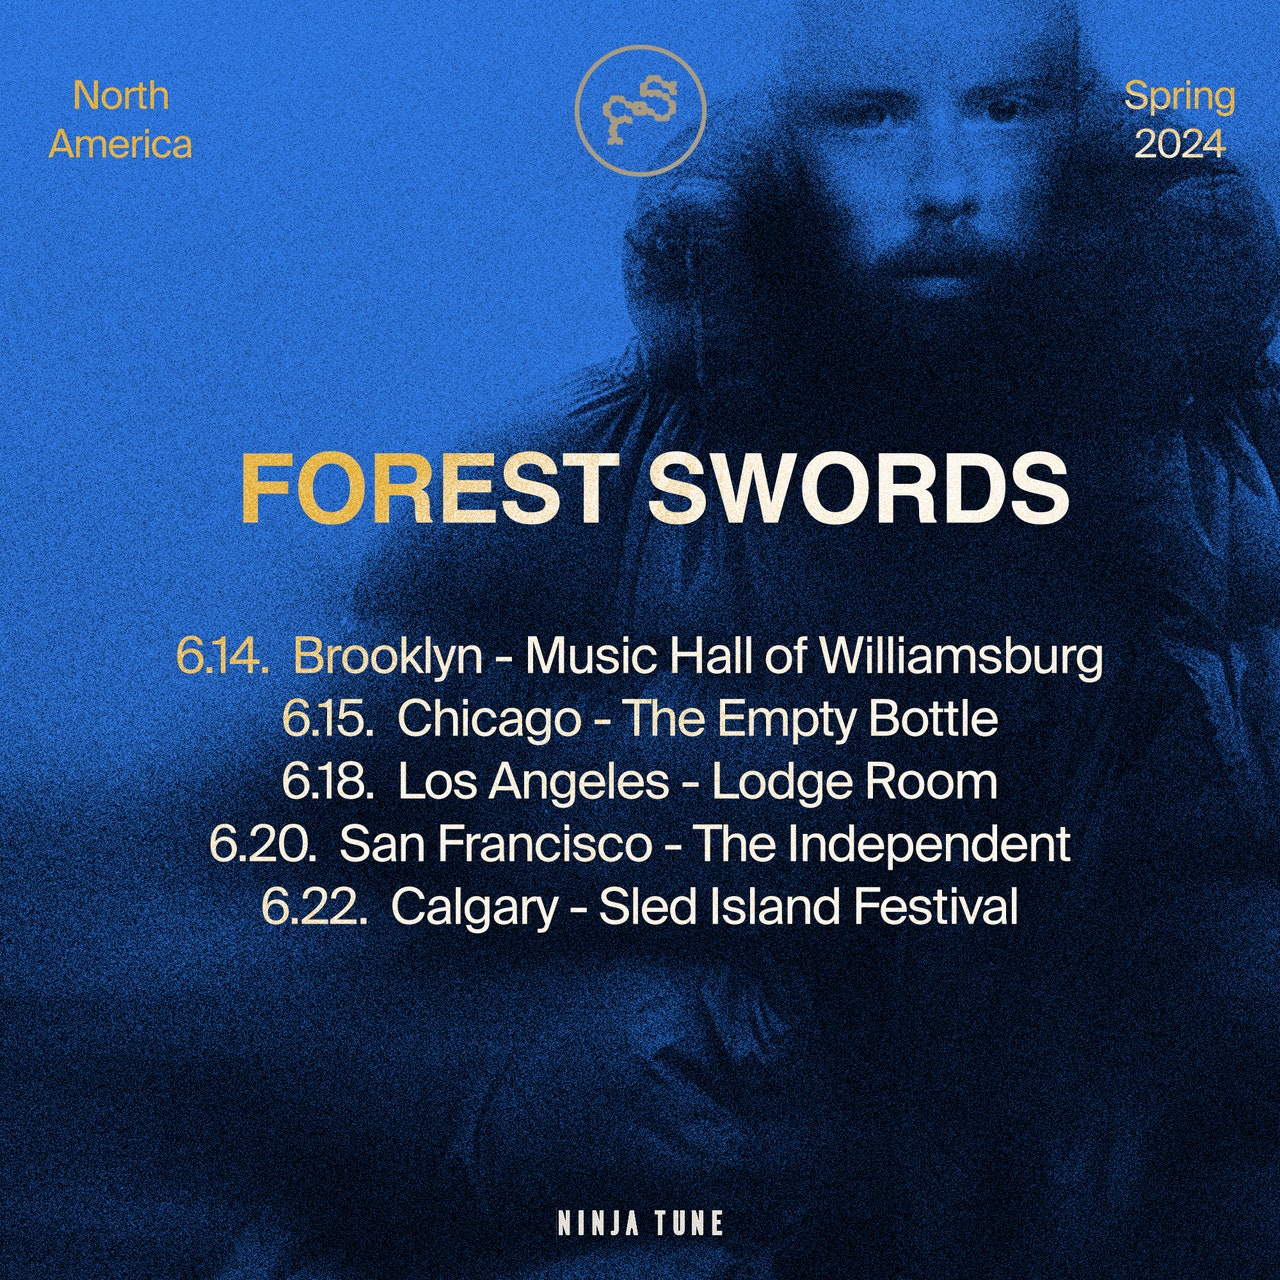 Forest Swords Announces North American Tour Dates, Shares New Songs: Listen